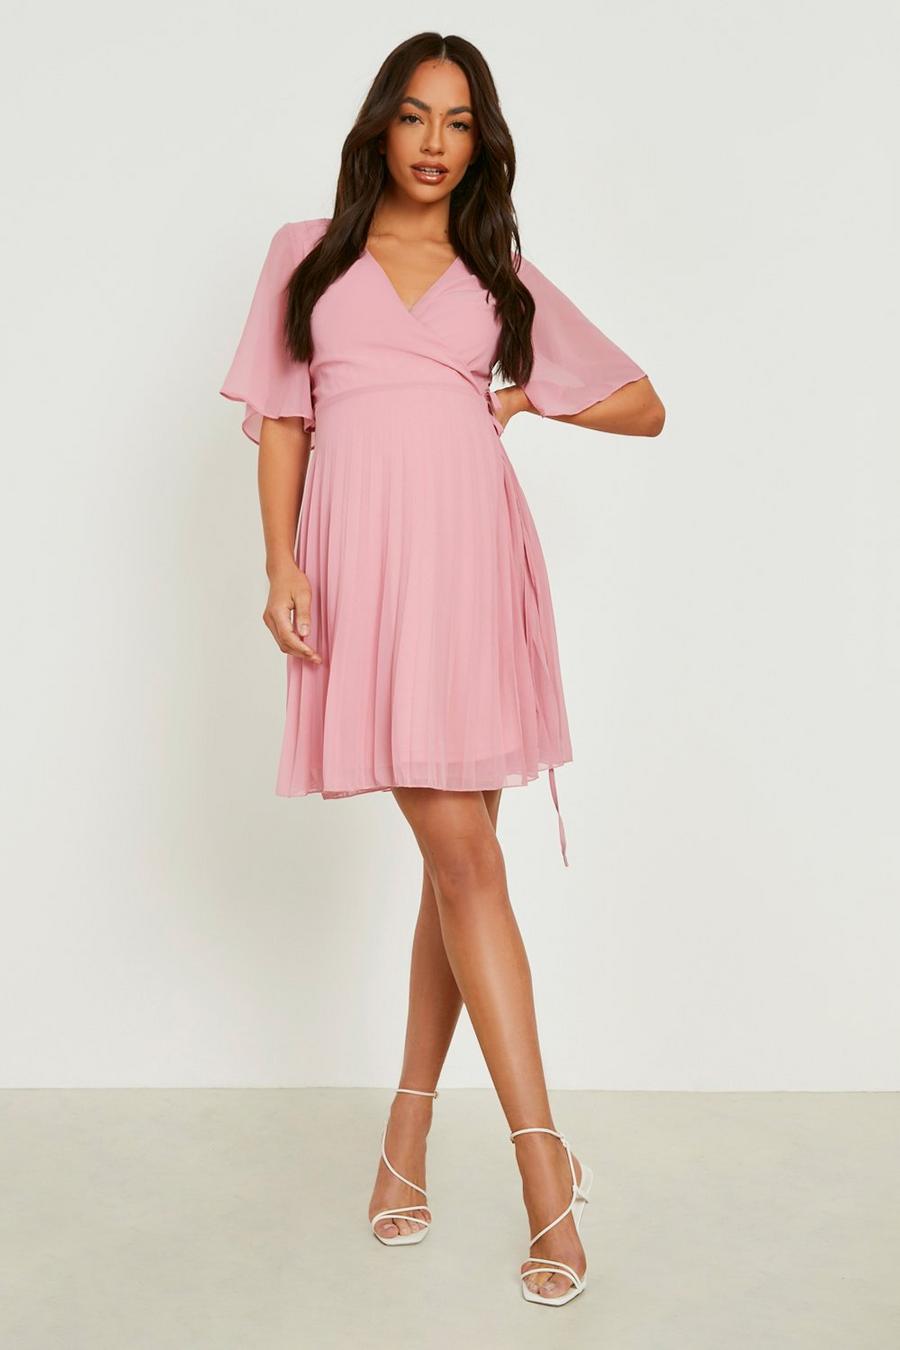 Blush pink Going Out Dresses